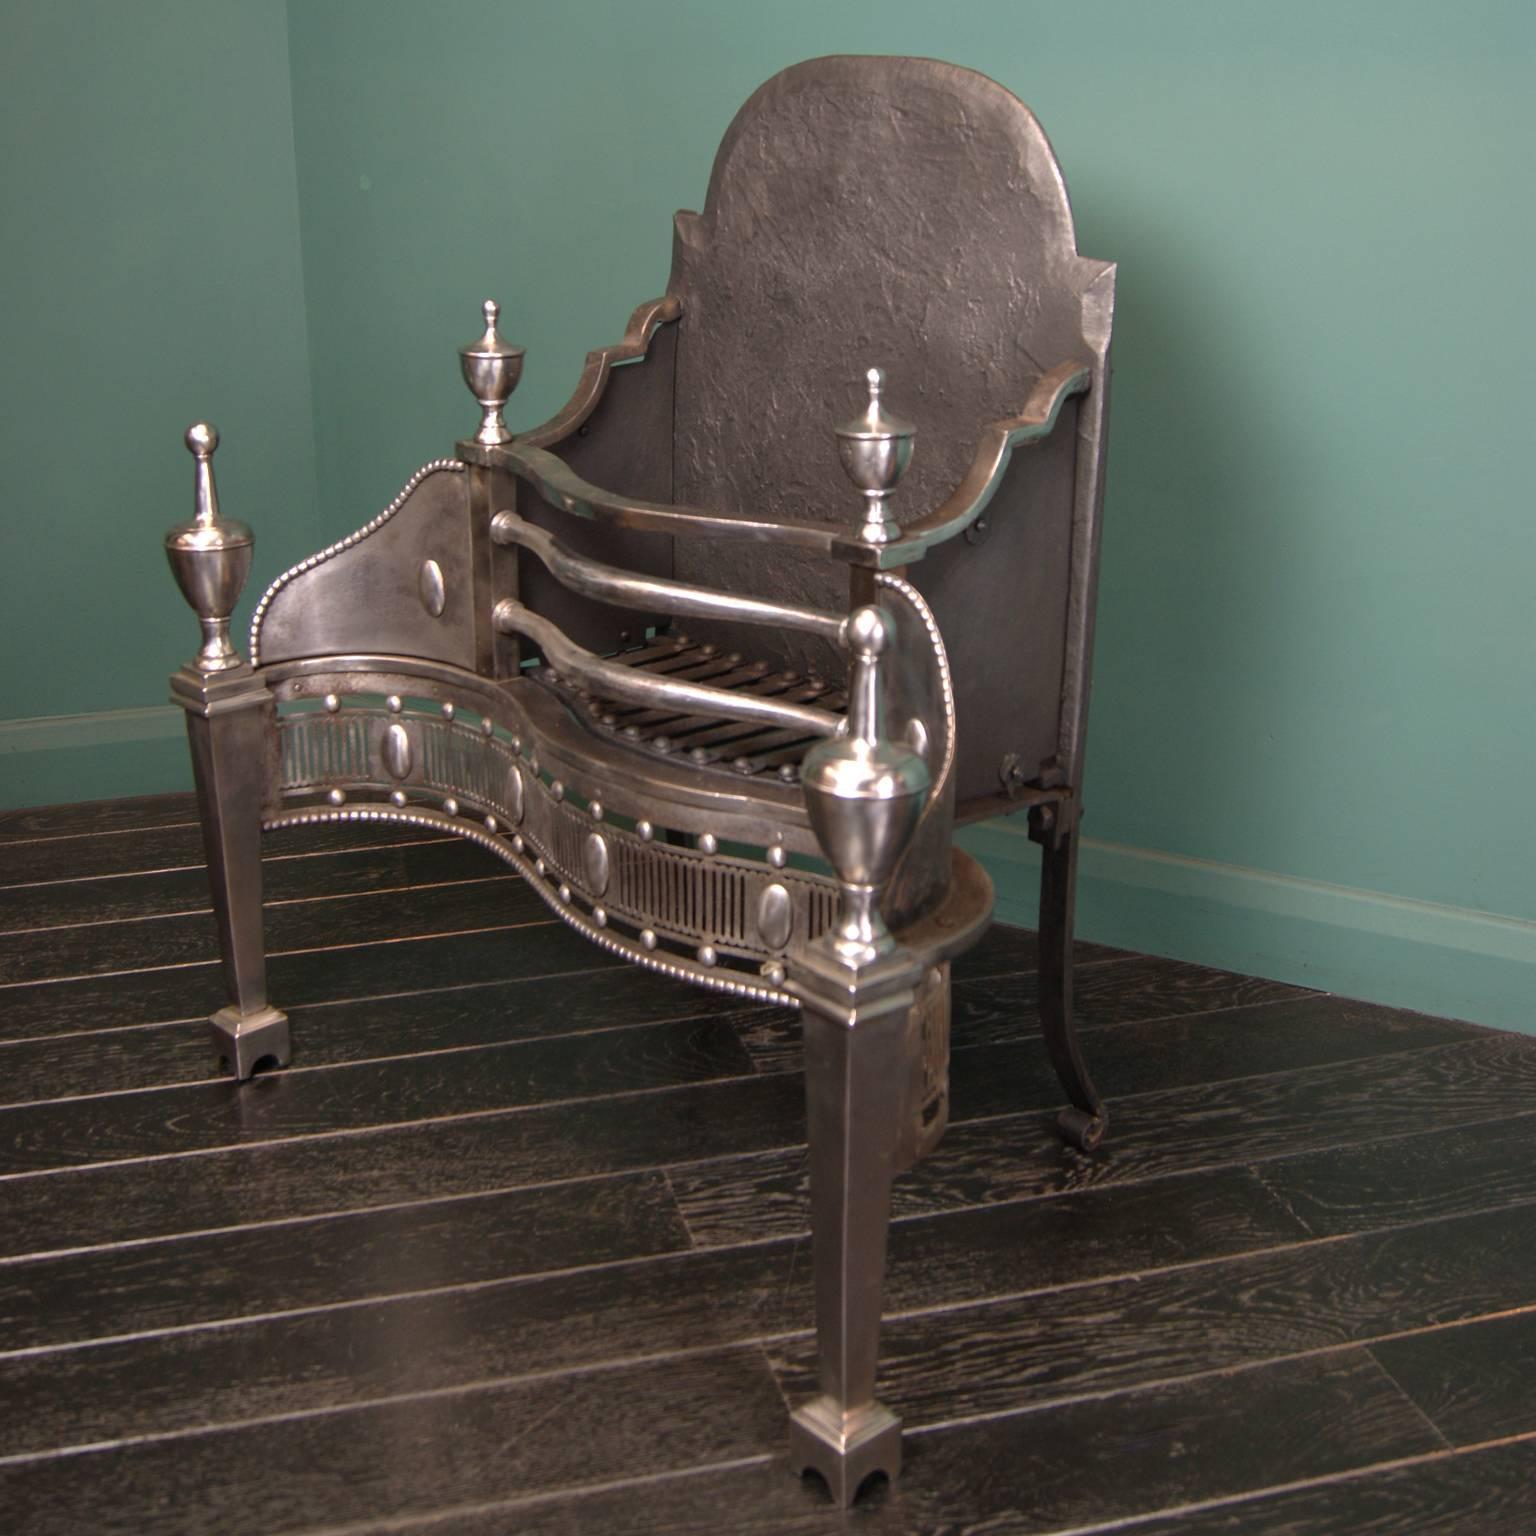 An elegant, tall polished steel dog grate. Tapered legs set on arched plinths under pinacle urn finials. Serpentine front with pierced fluted fret plate interrupted with paterae over beaded moulding. Rear elements consist of rivet-work grill, shaped